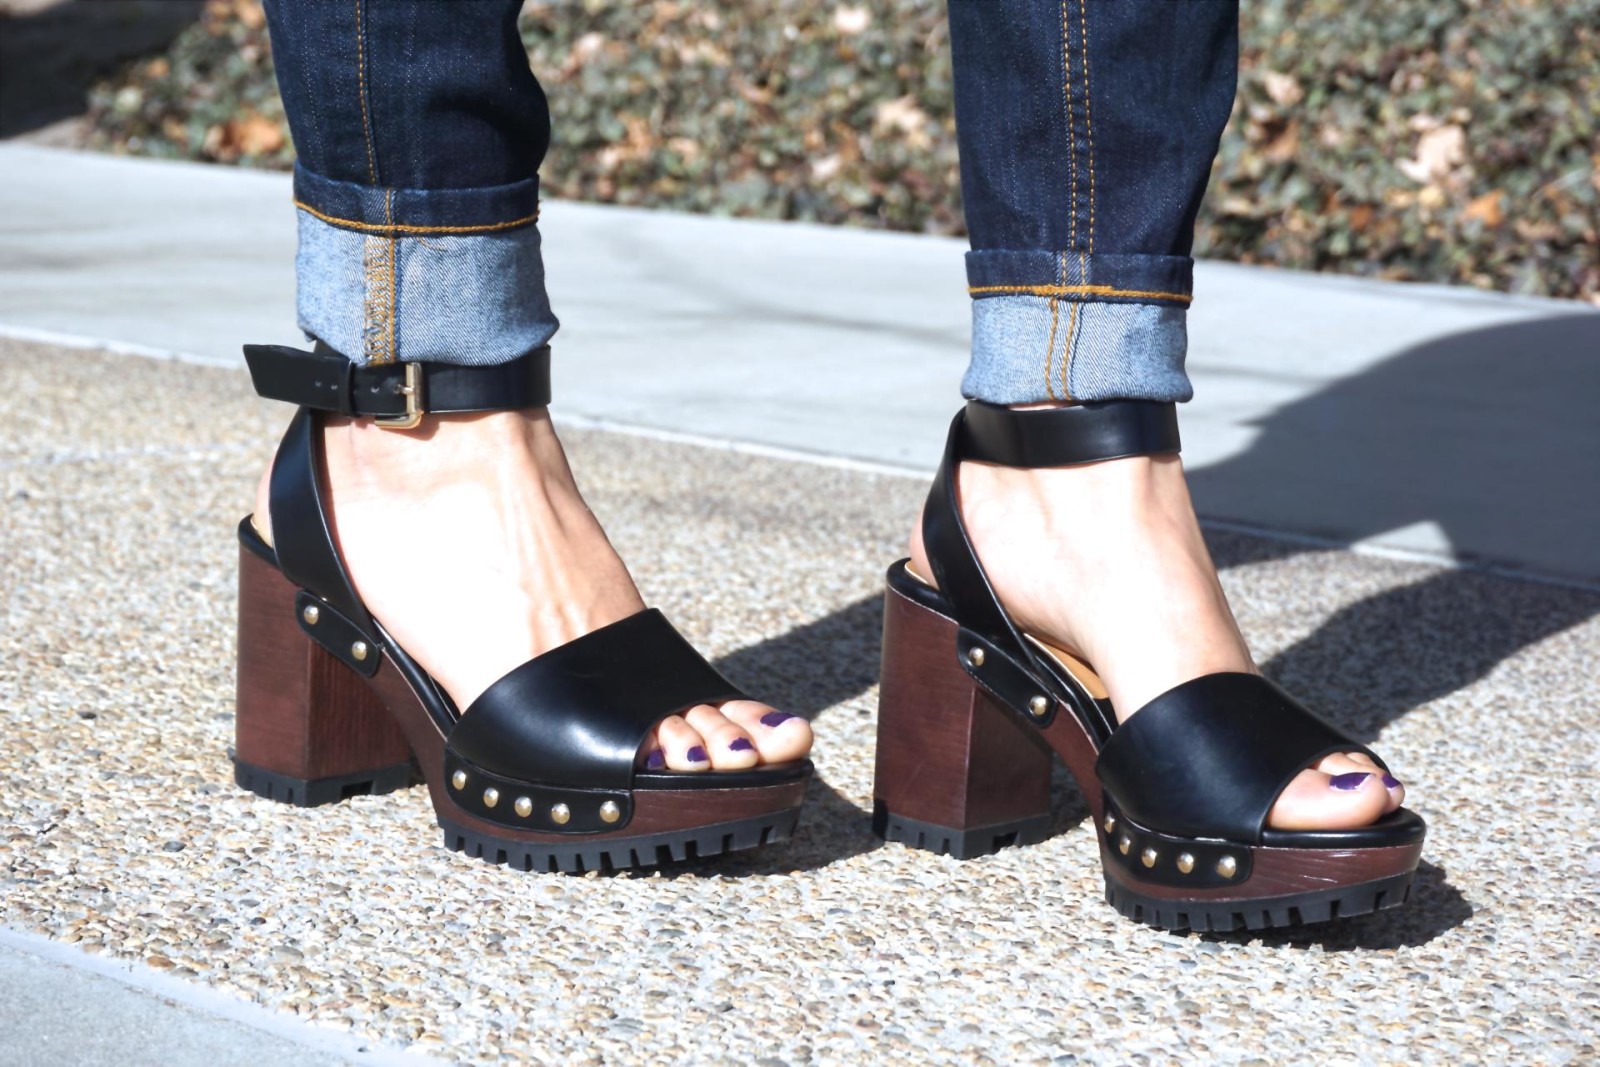 Zara Shoes, Sandals with Ankle strap and track sole, Black sandals, Spring shoes, Dark denim, cuffed jeans